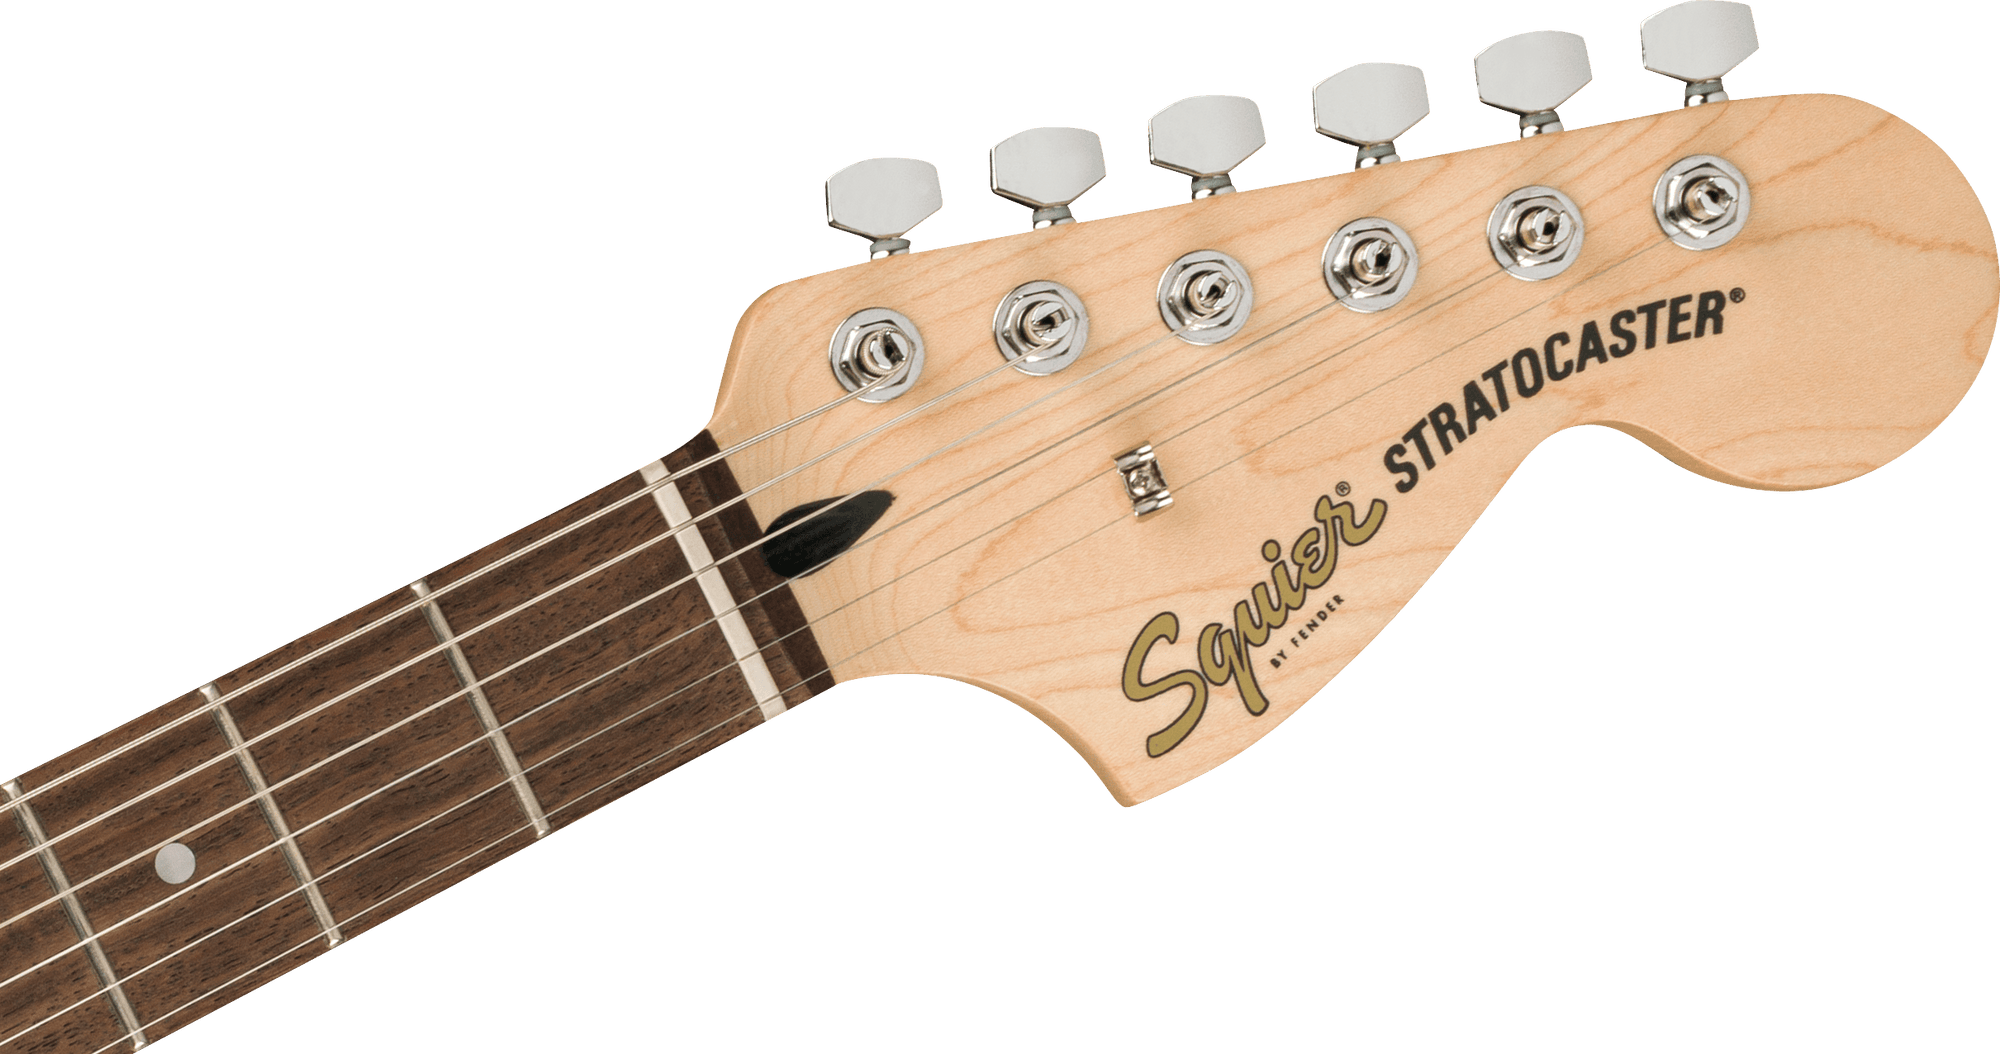 Affinity Series Stratocaster HH, Charcoal Frost Metalic